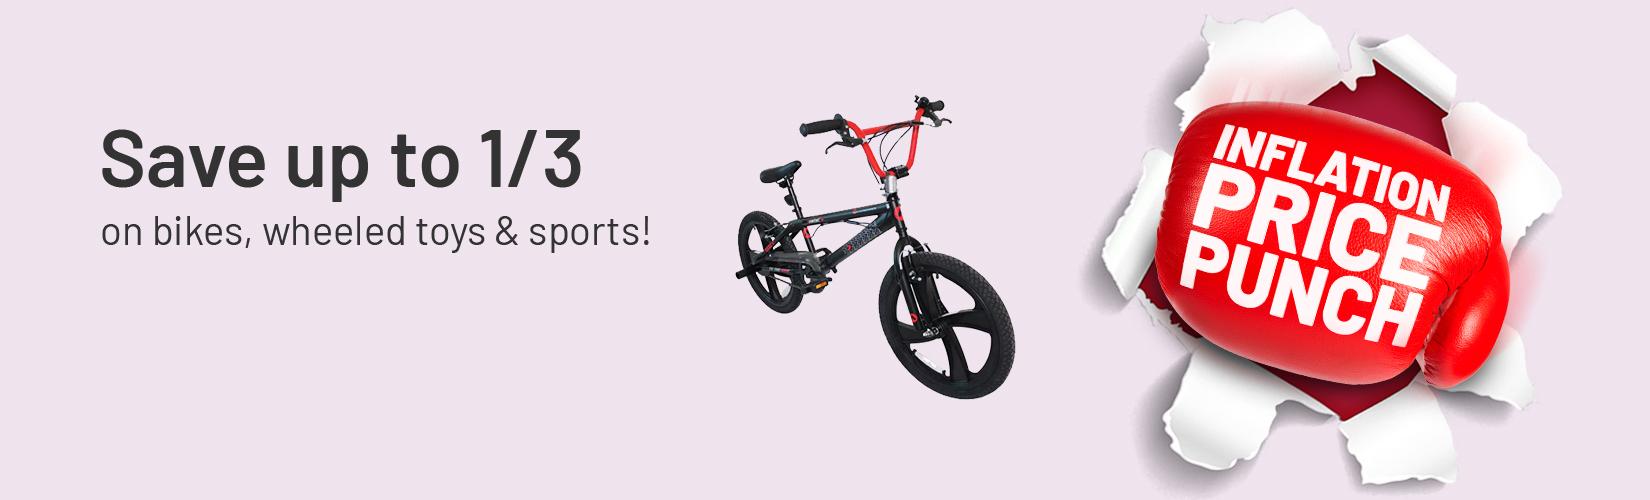 Save up to 1/3 on bikes, wheeled toys & sports!